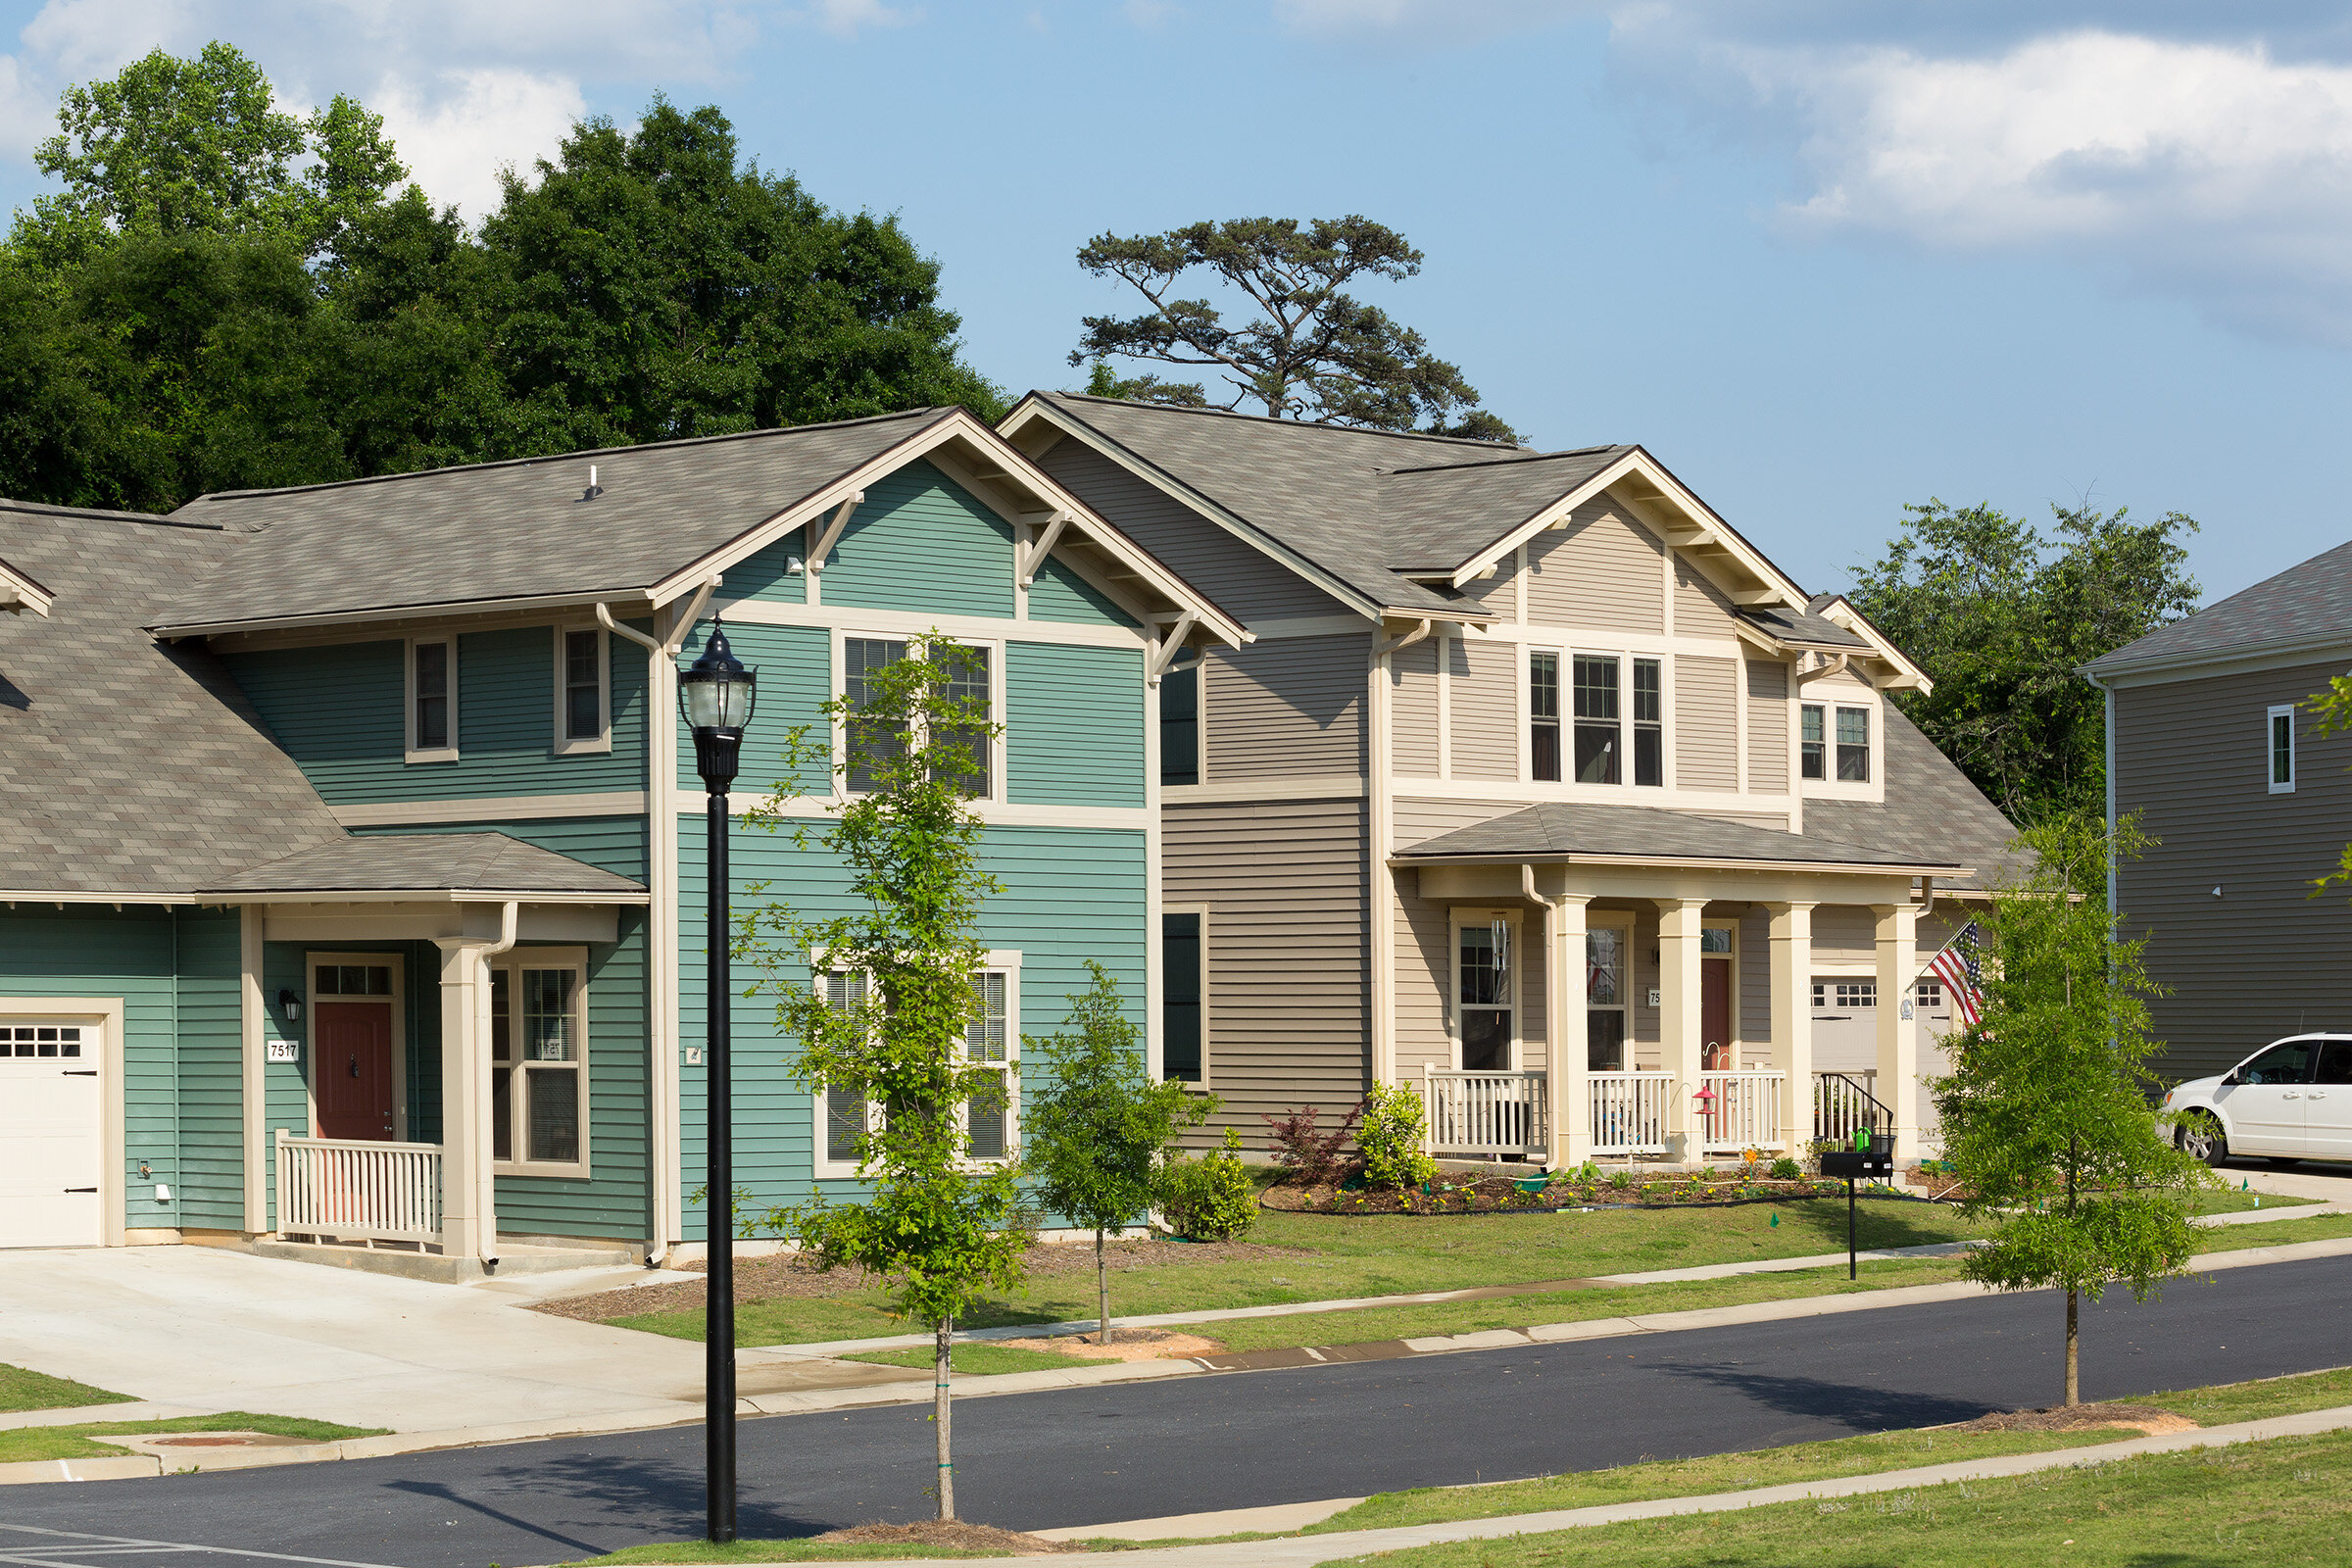  The Upatoi neighborhood at The Villages at Fort Moore offers 3-, 4-, and 5-bedroom homes for servicemembers and their families. 